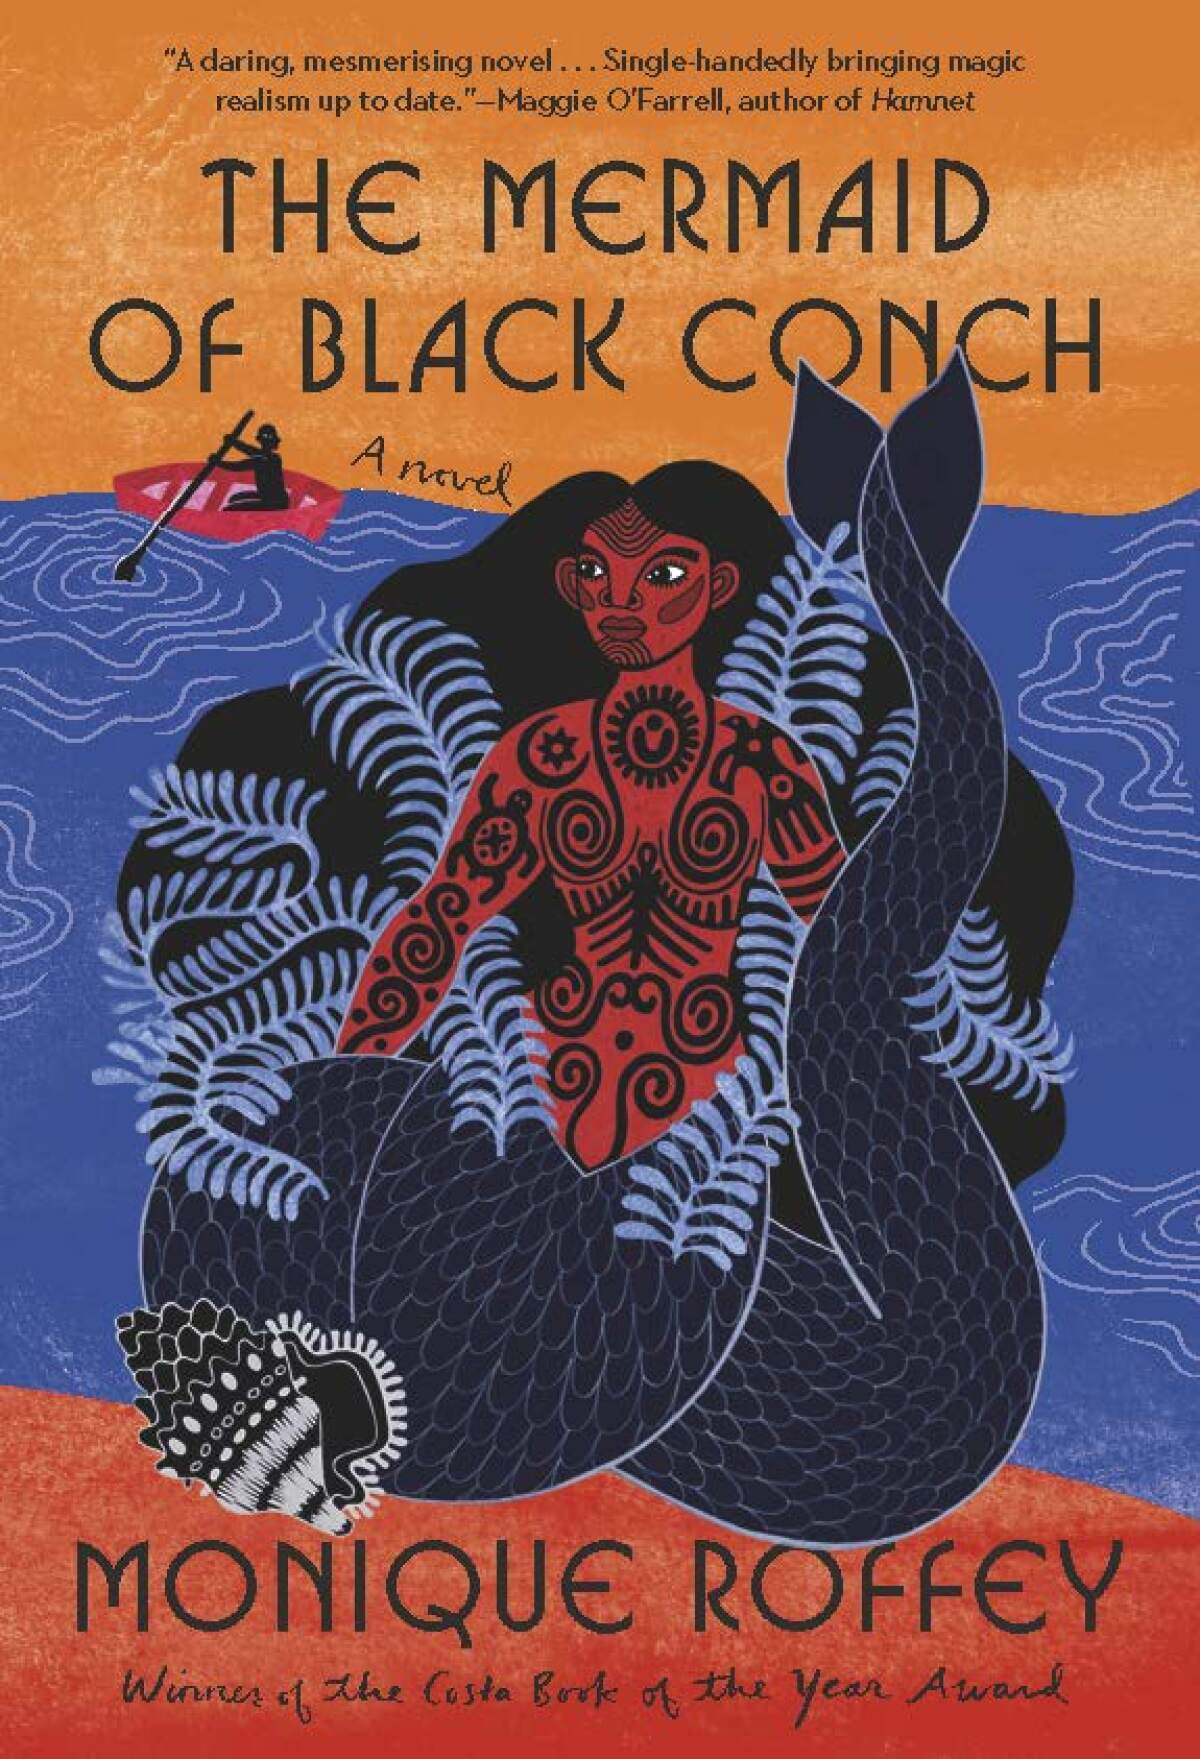 "The Mermaid of Black Conch," by Monique Roffey